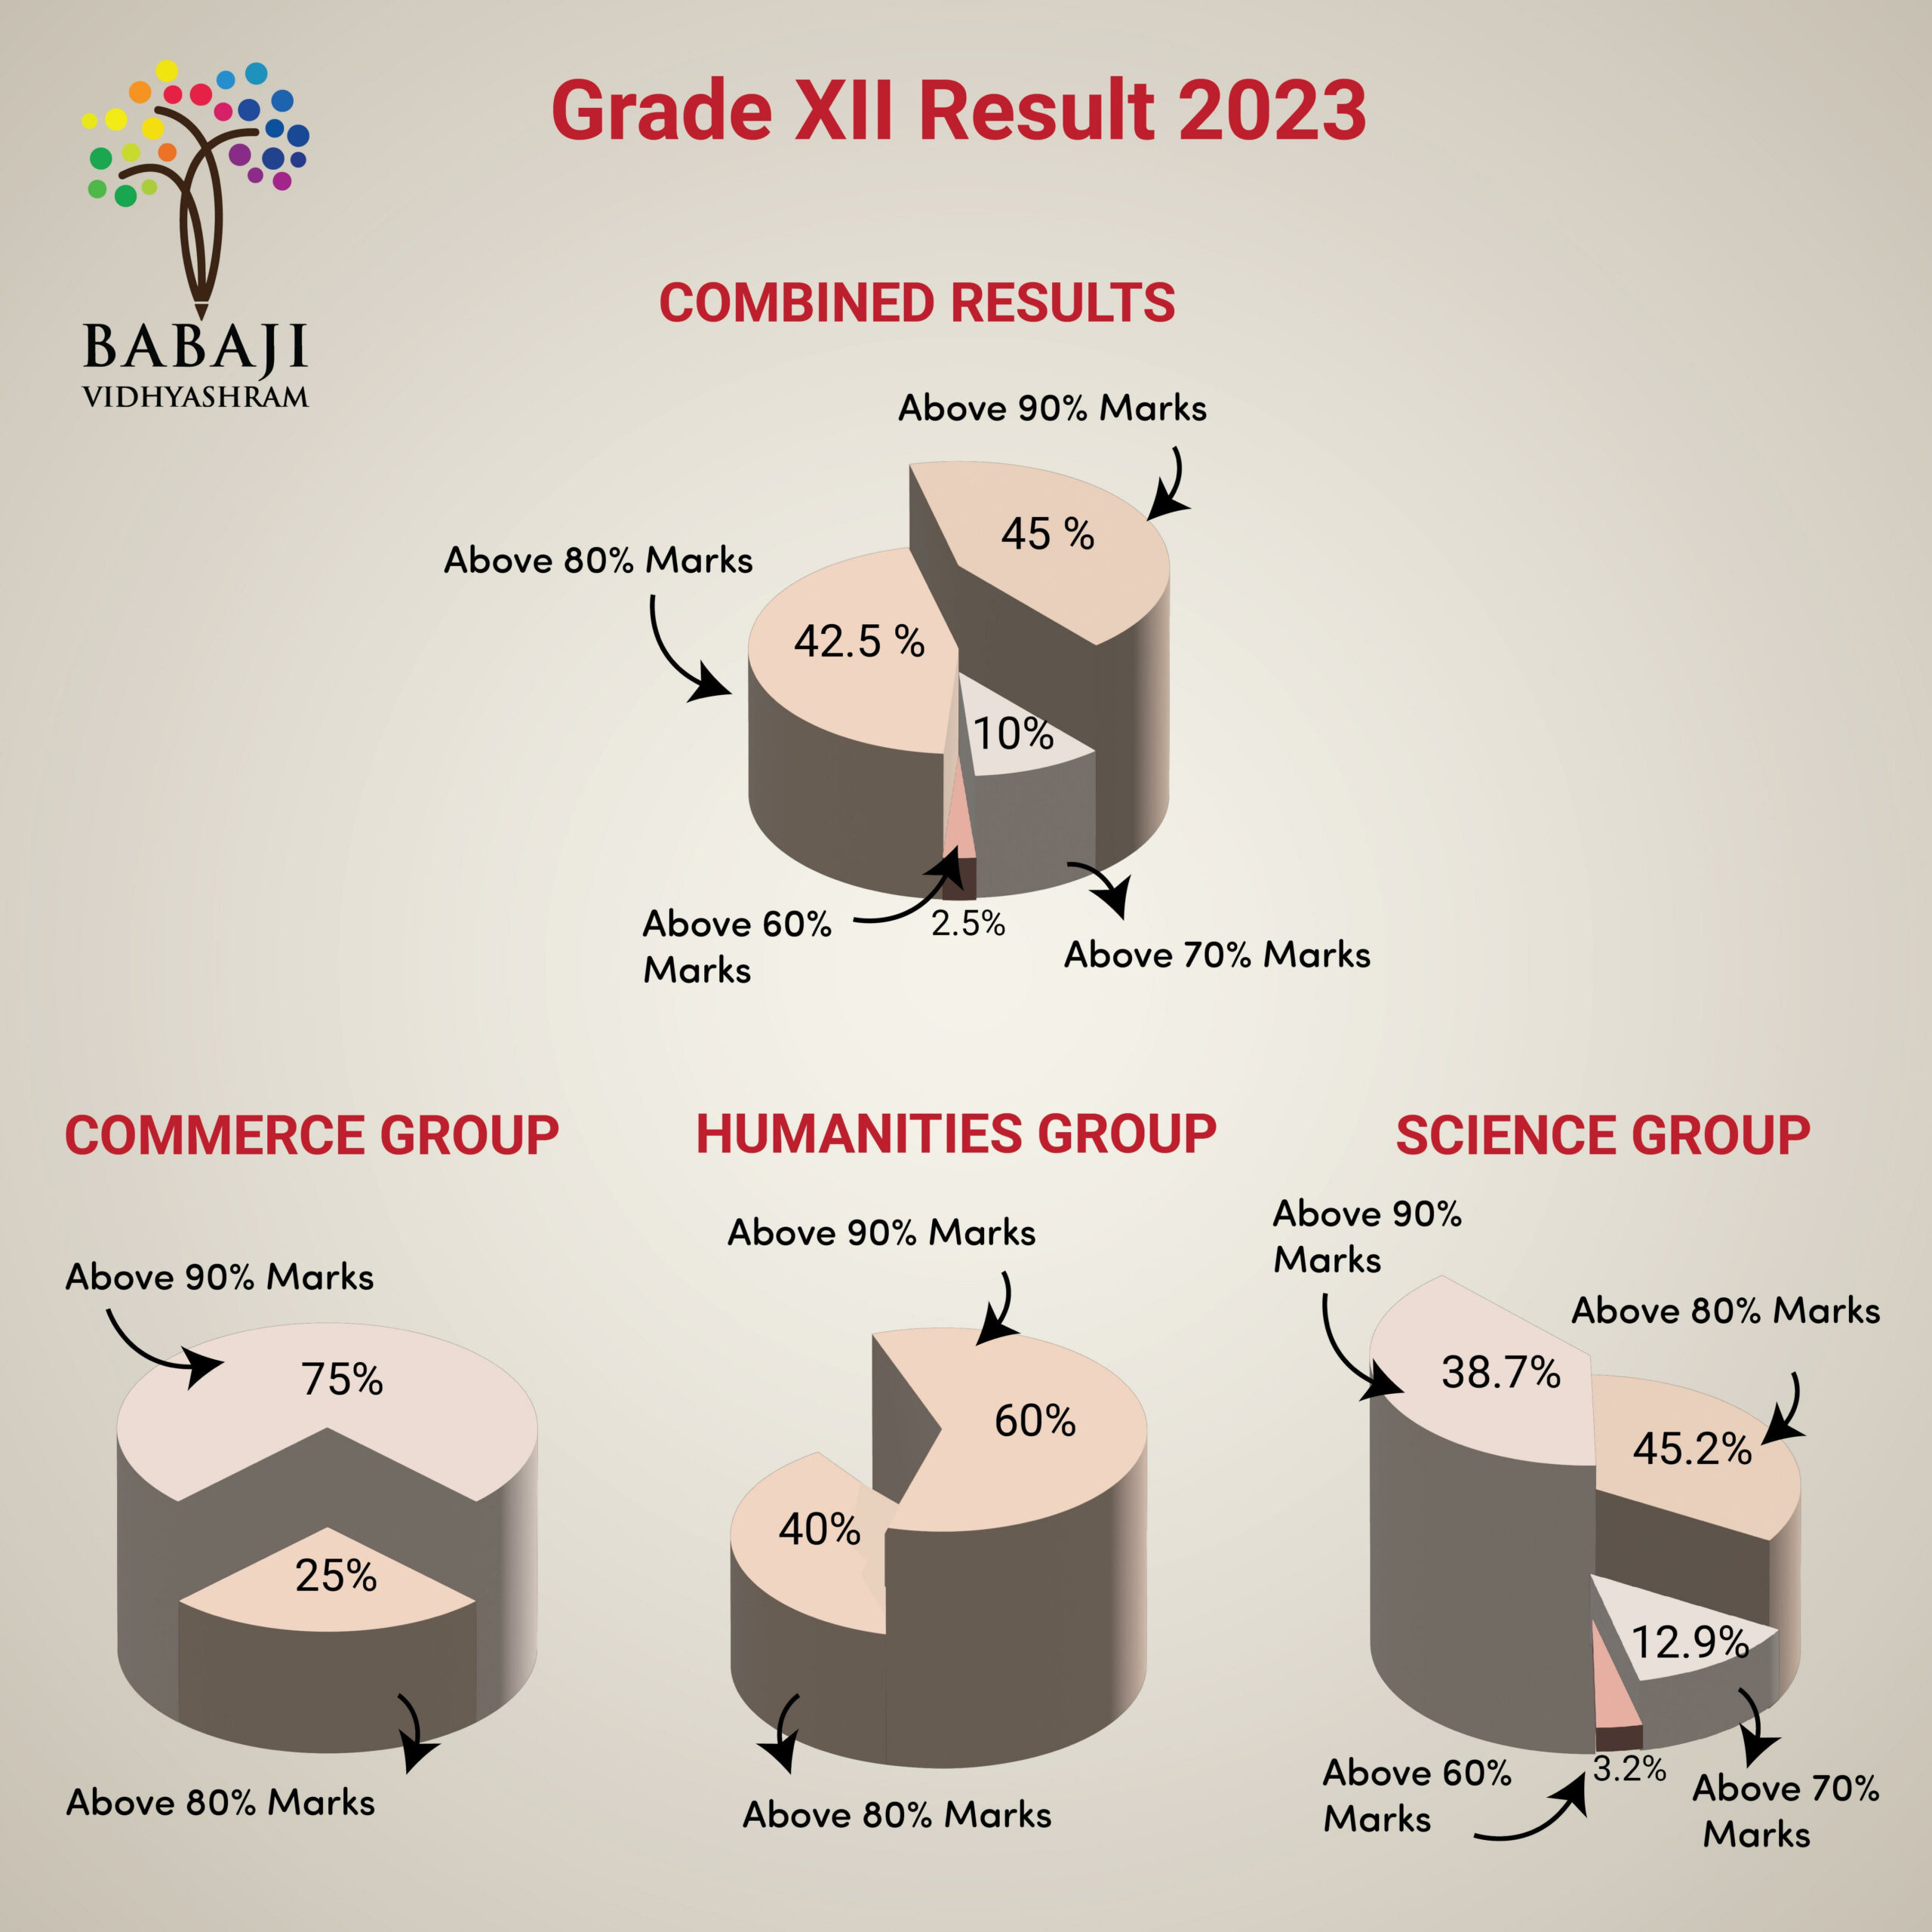 The image displays the Grade XII Result 2023 Analysis with pie charts.